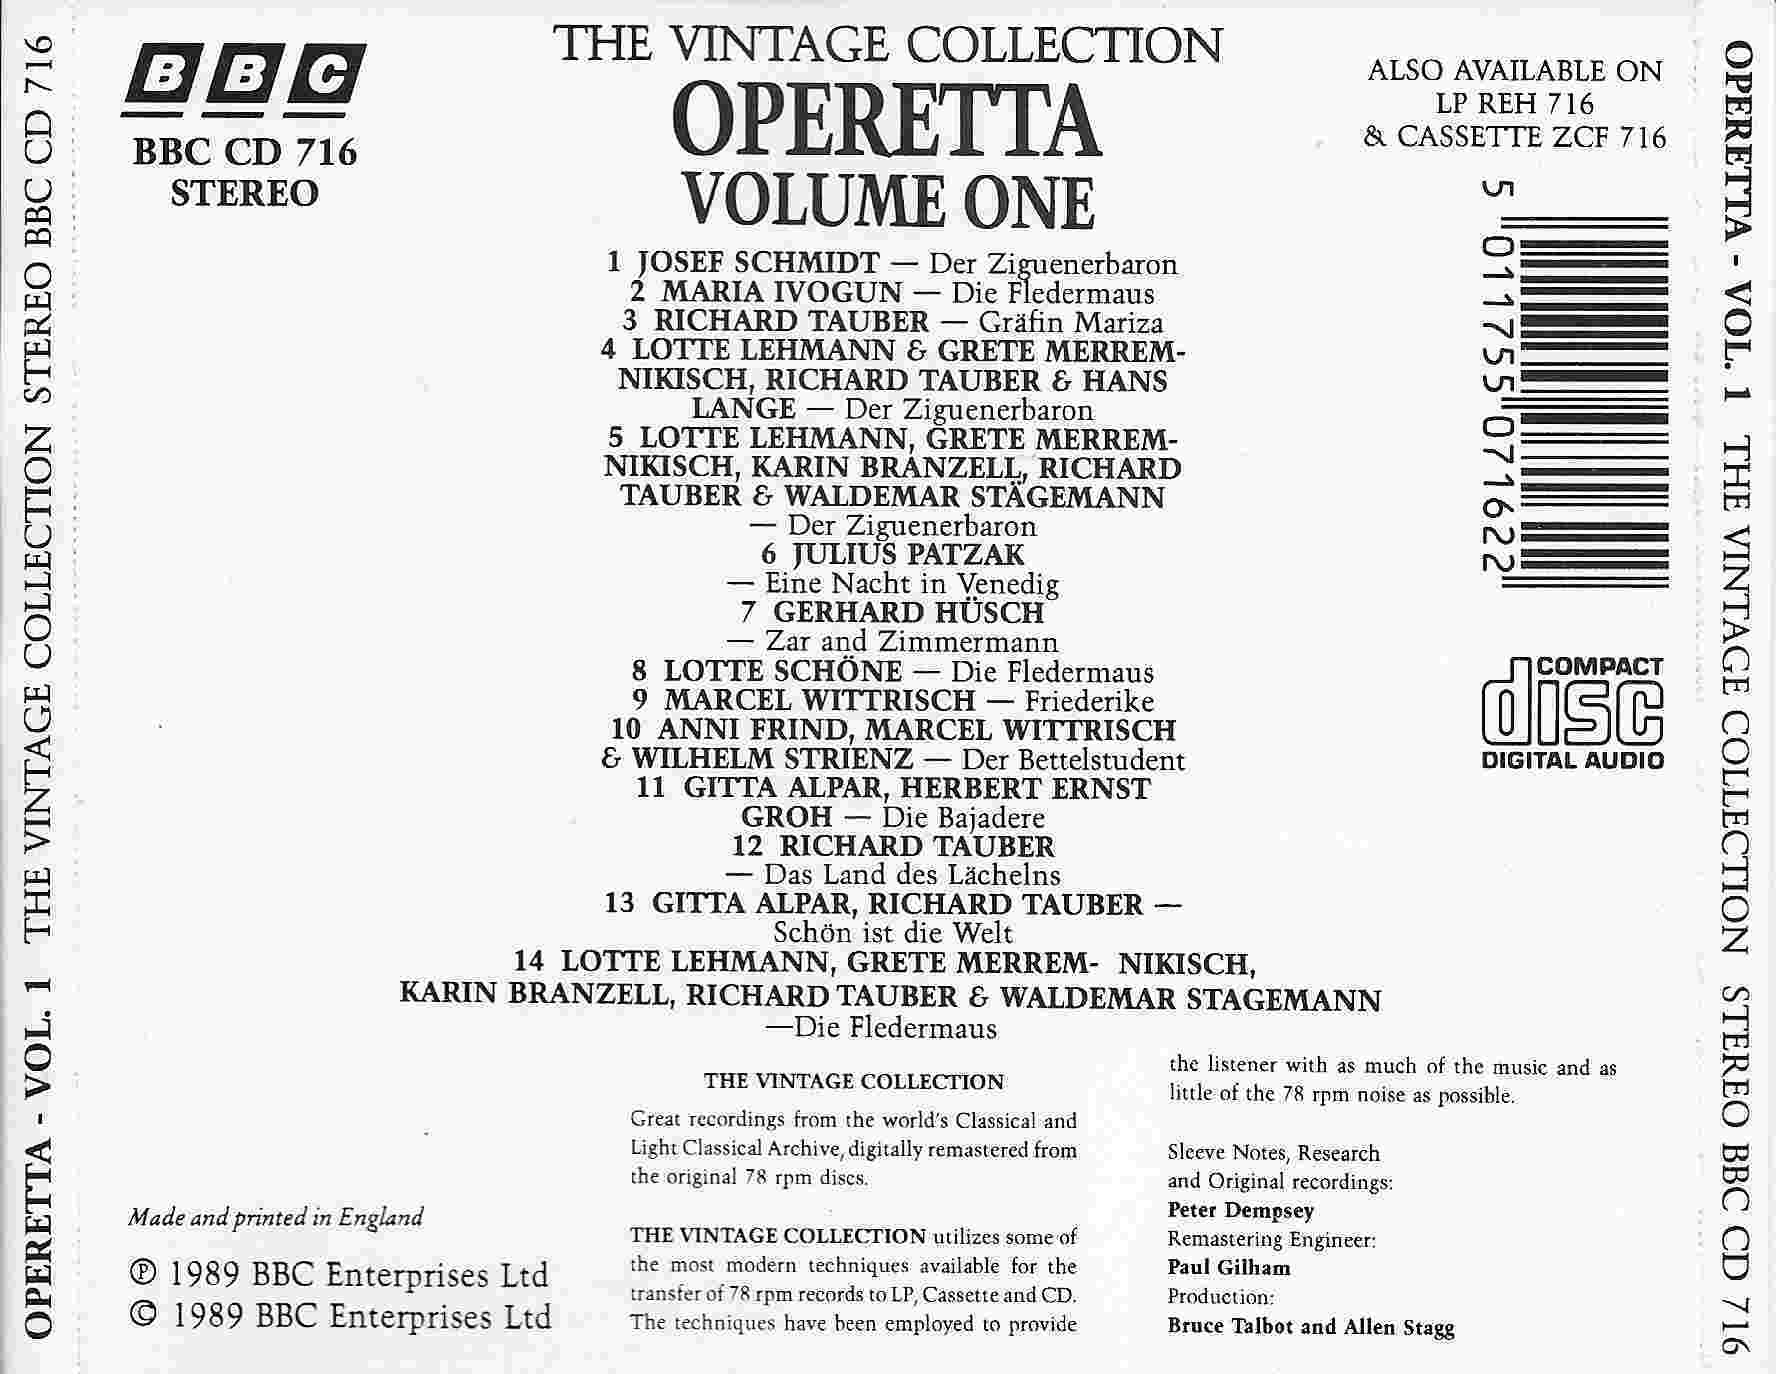 Picture of BBCCD716 The vintage collection - Operetta by artist Various from the BBC records and Tapes library